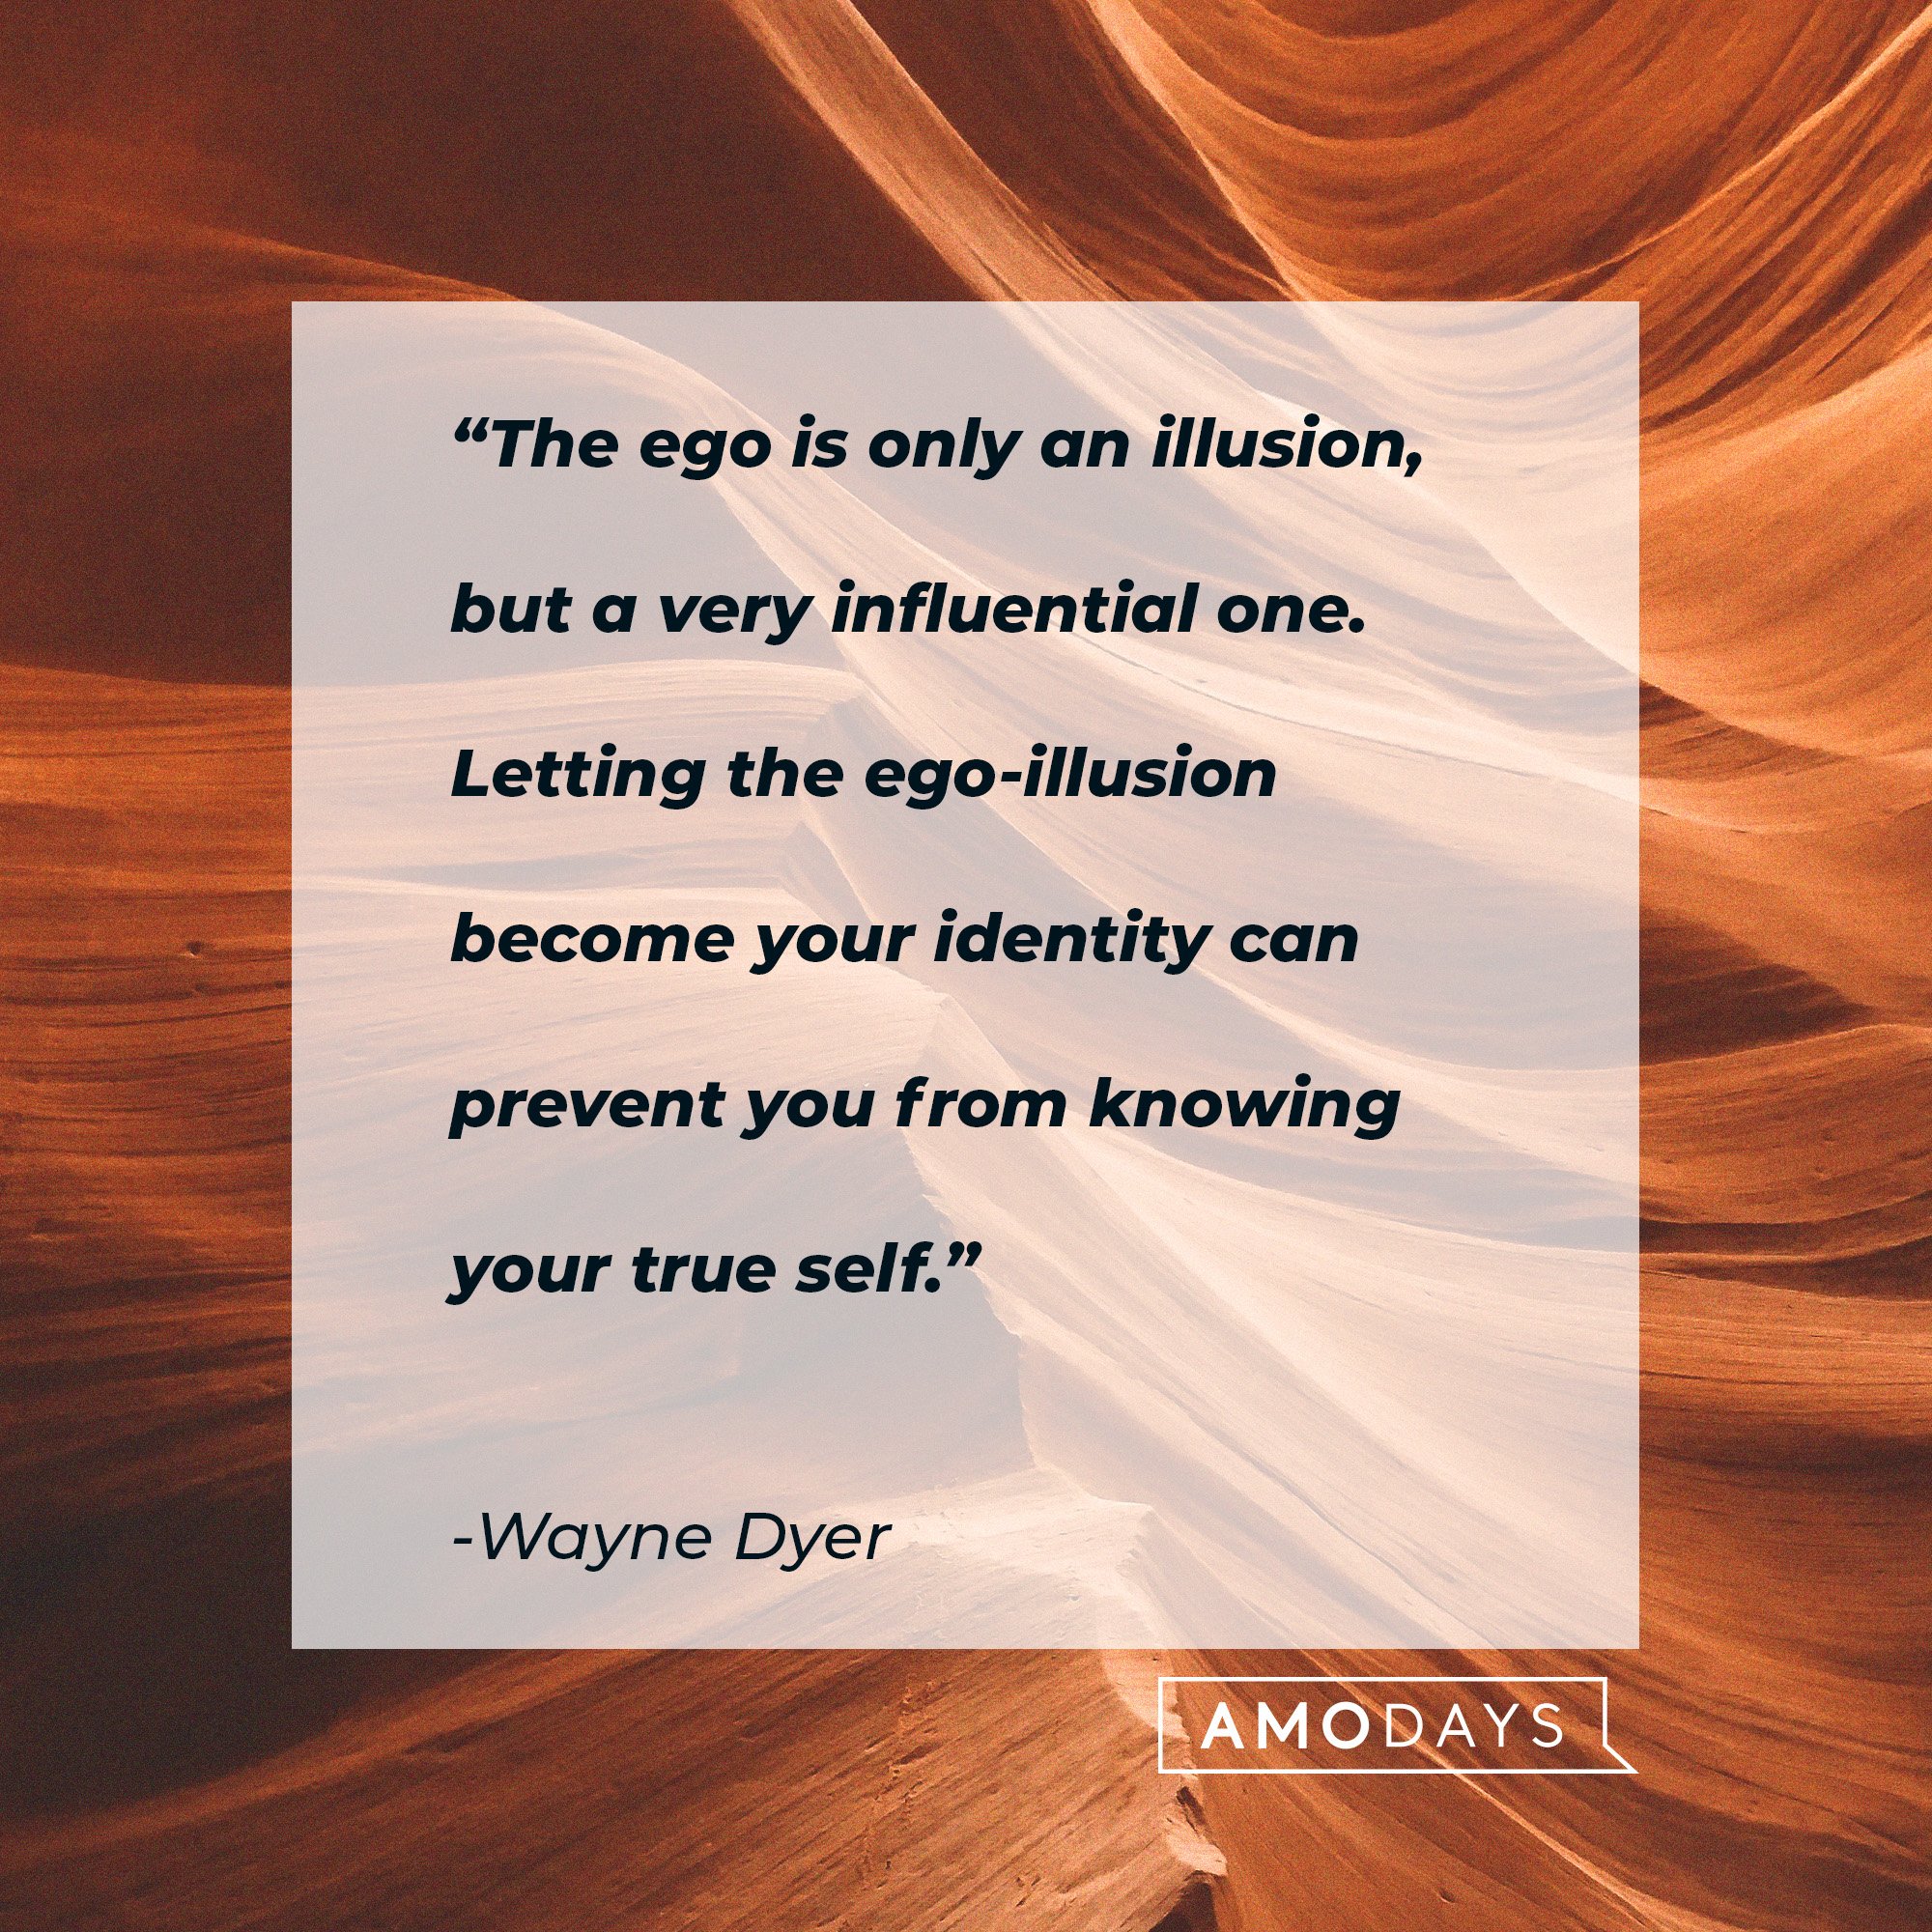 Wayne Dyer's quote: “The ego is only an illusion, but a very influential one. Letting the ego-illusion become your identity can prevent you from knowing your true self.” | Image: AmoDays